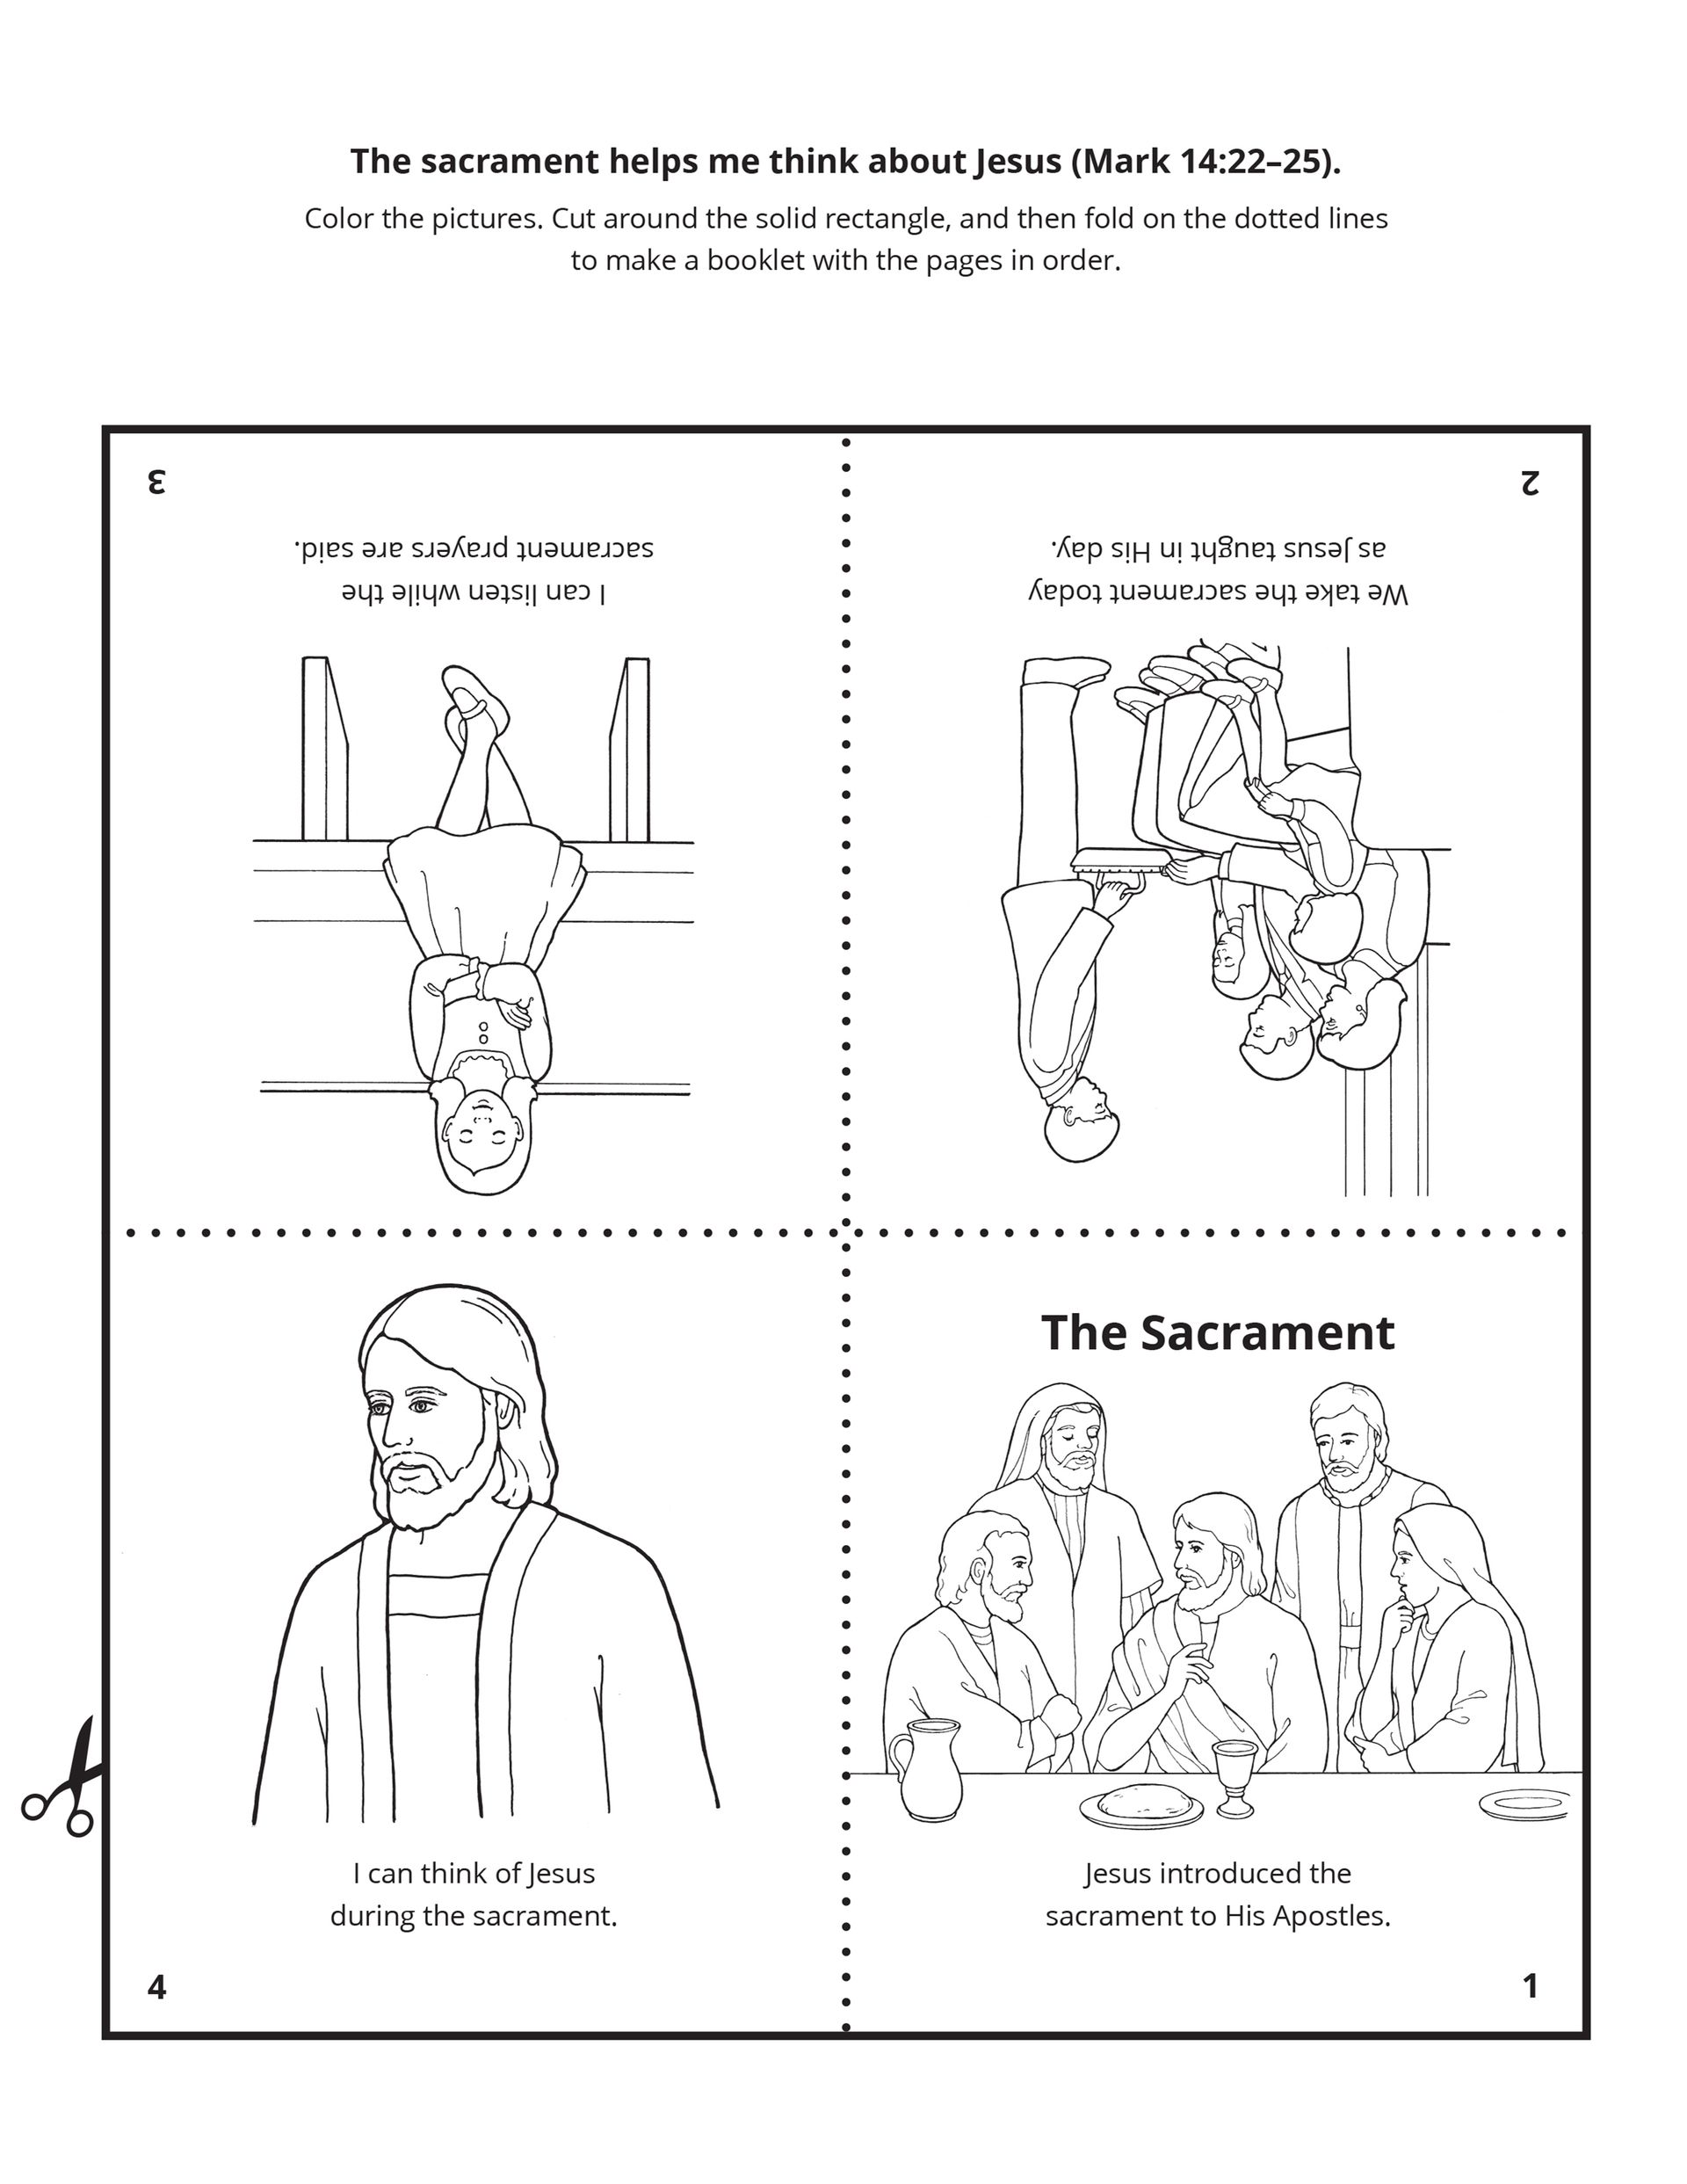 A booklet about the sacrament.